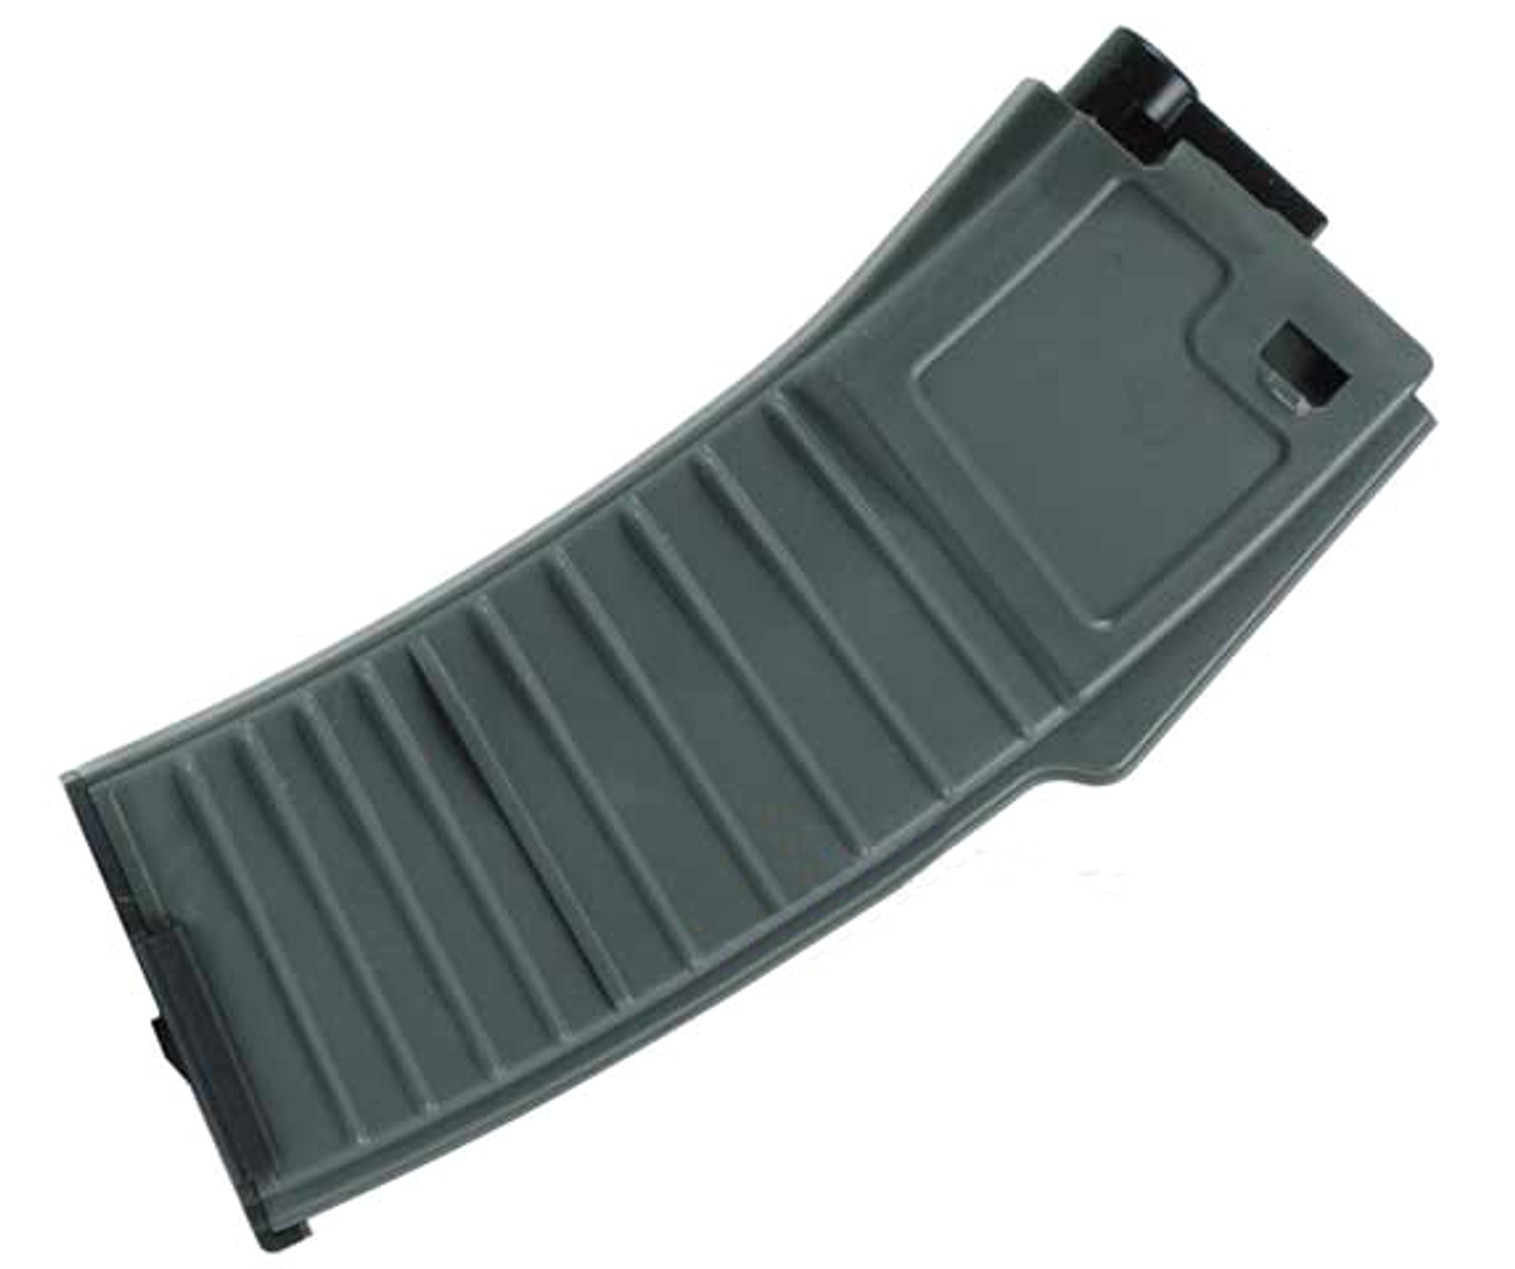 PDW Type 120 RD Mid-Cap Magazine for PDW RDW M4 M16 Series Airsoft AEG